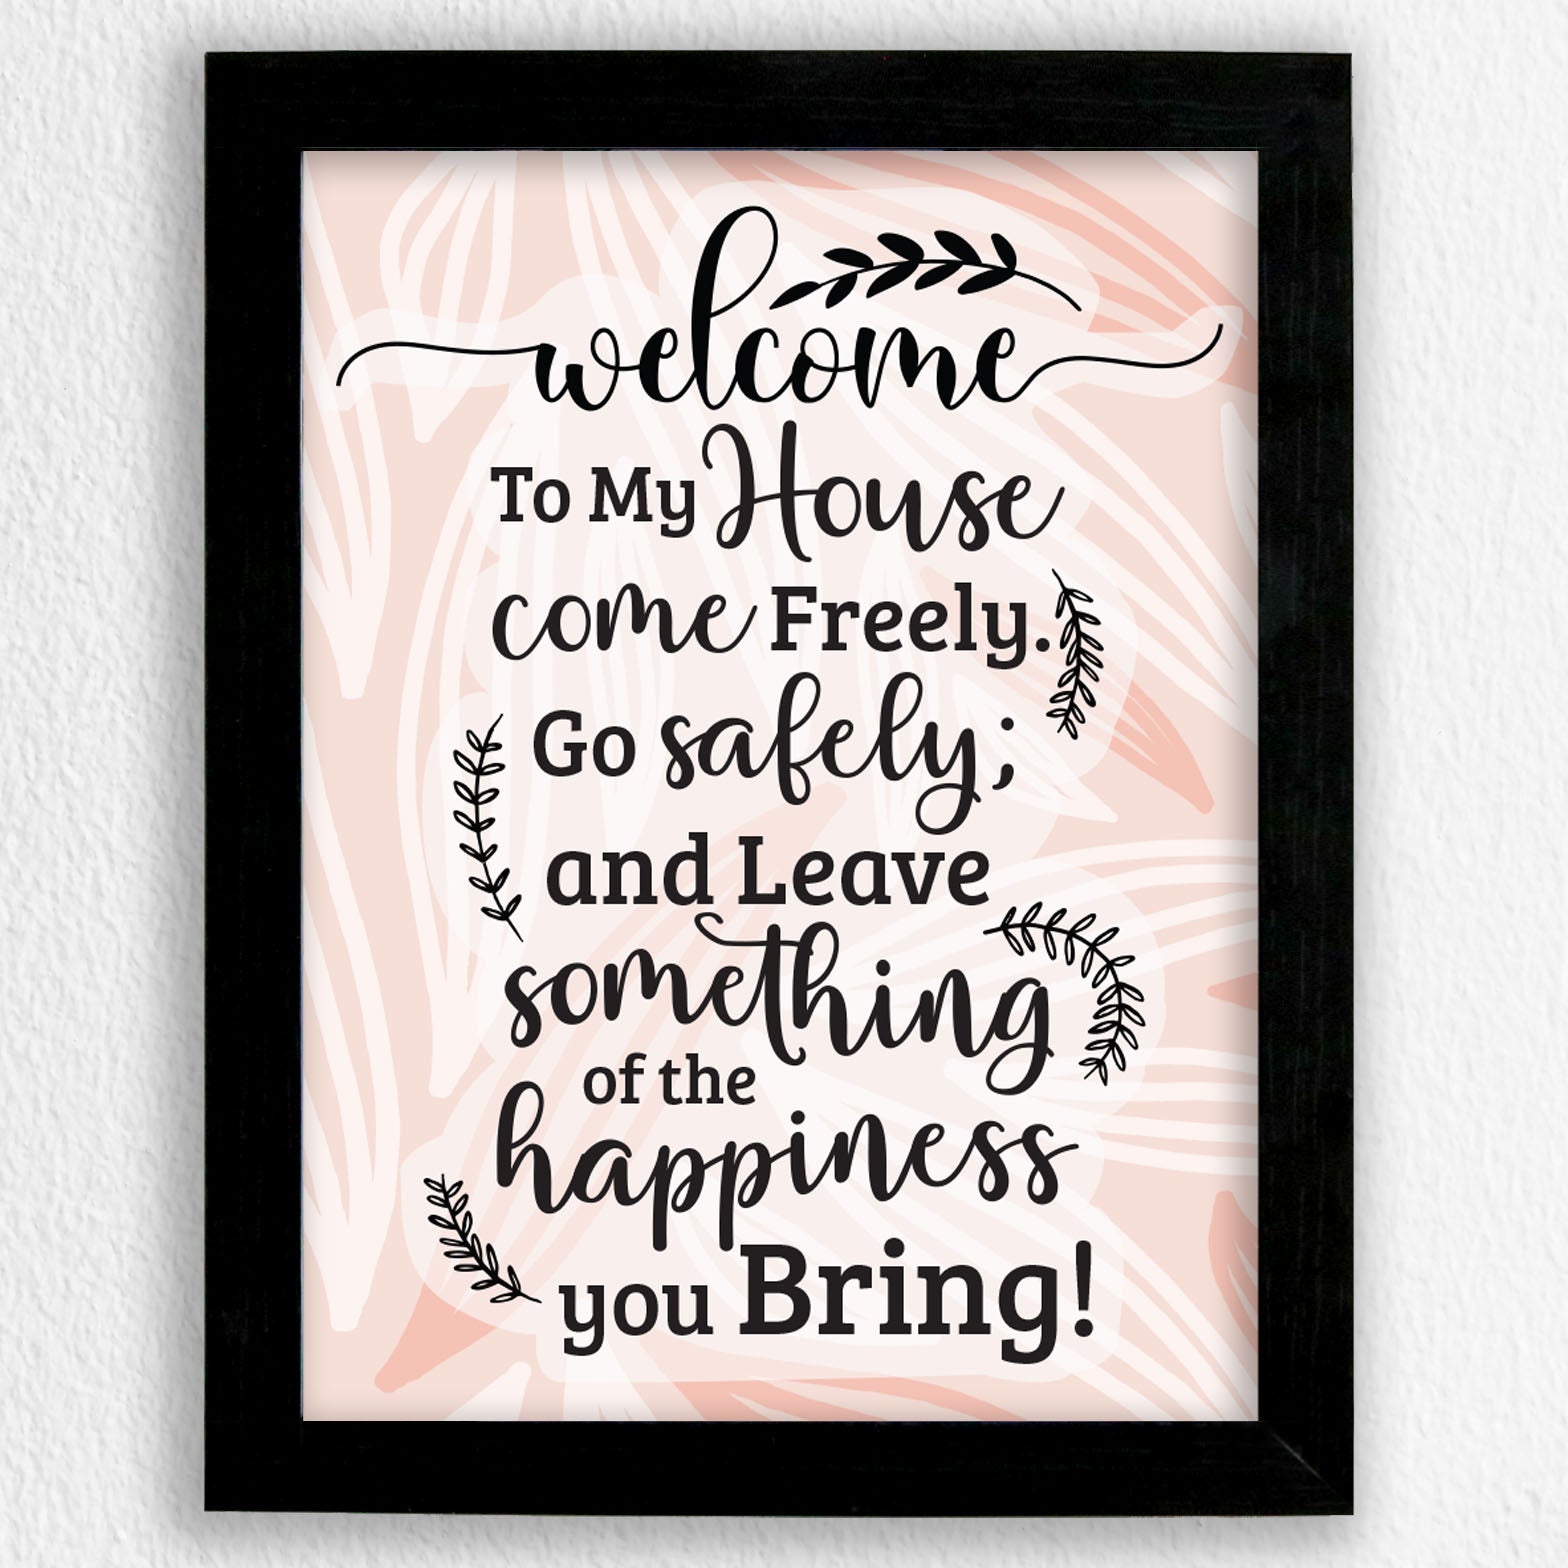 Welcome To My House - Art Frame